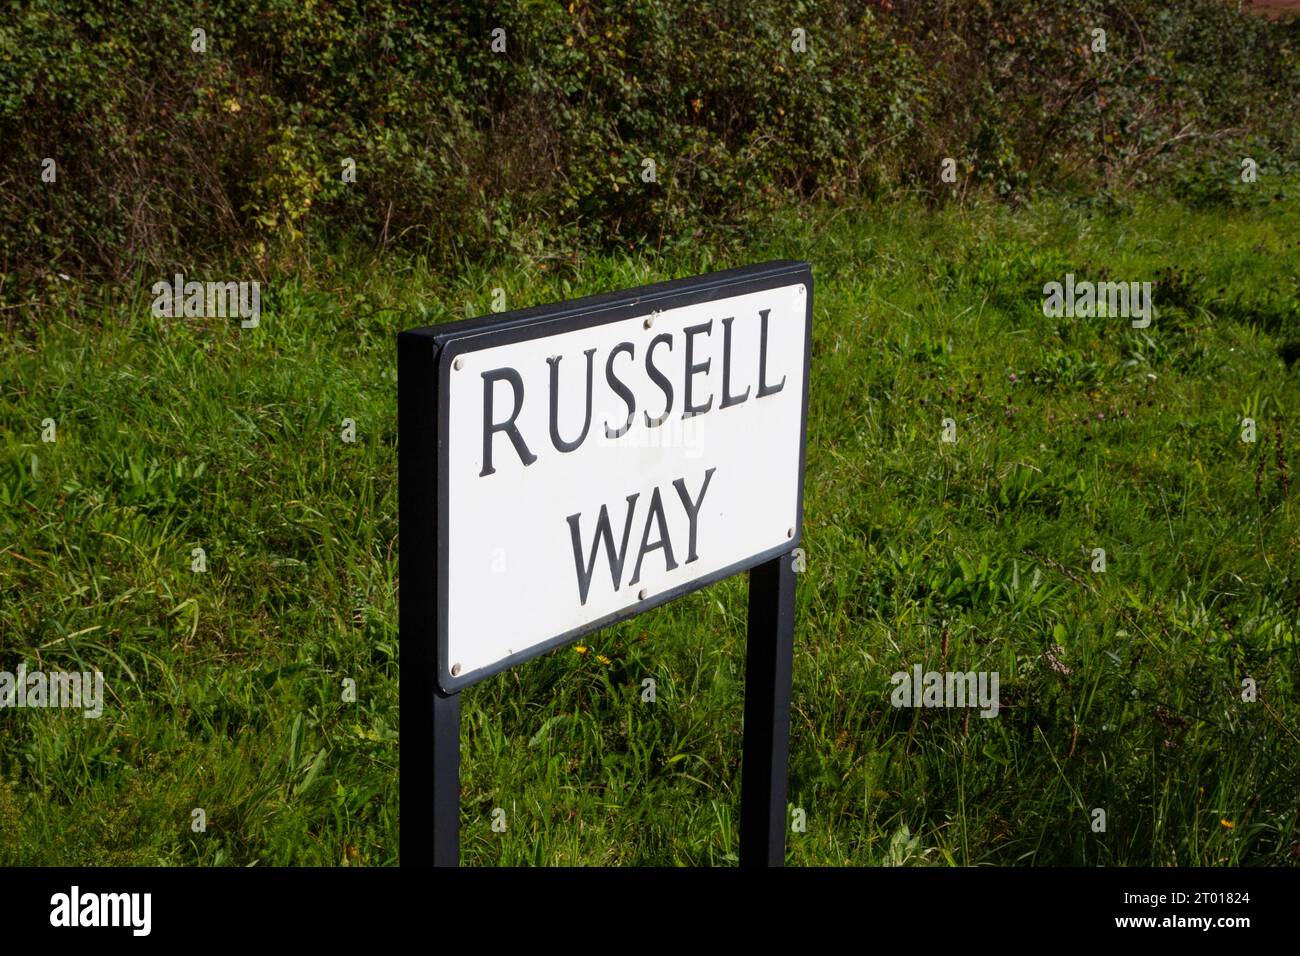 Russell Way road sign with green grass background Stock Photo